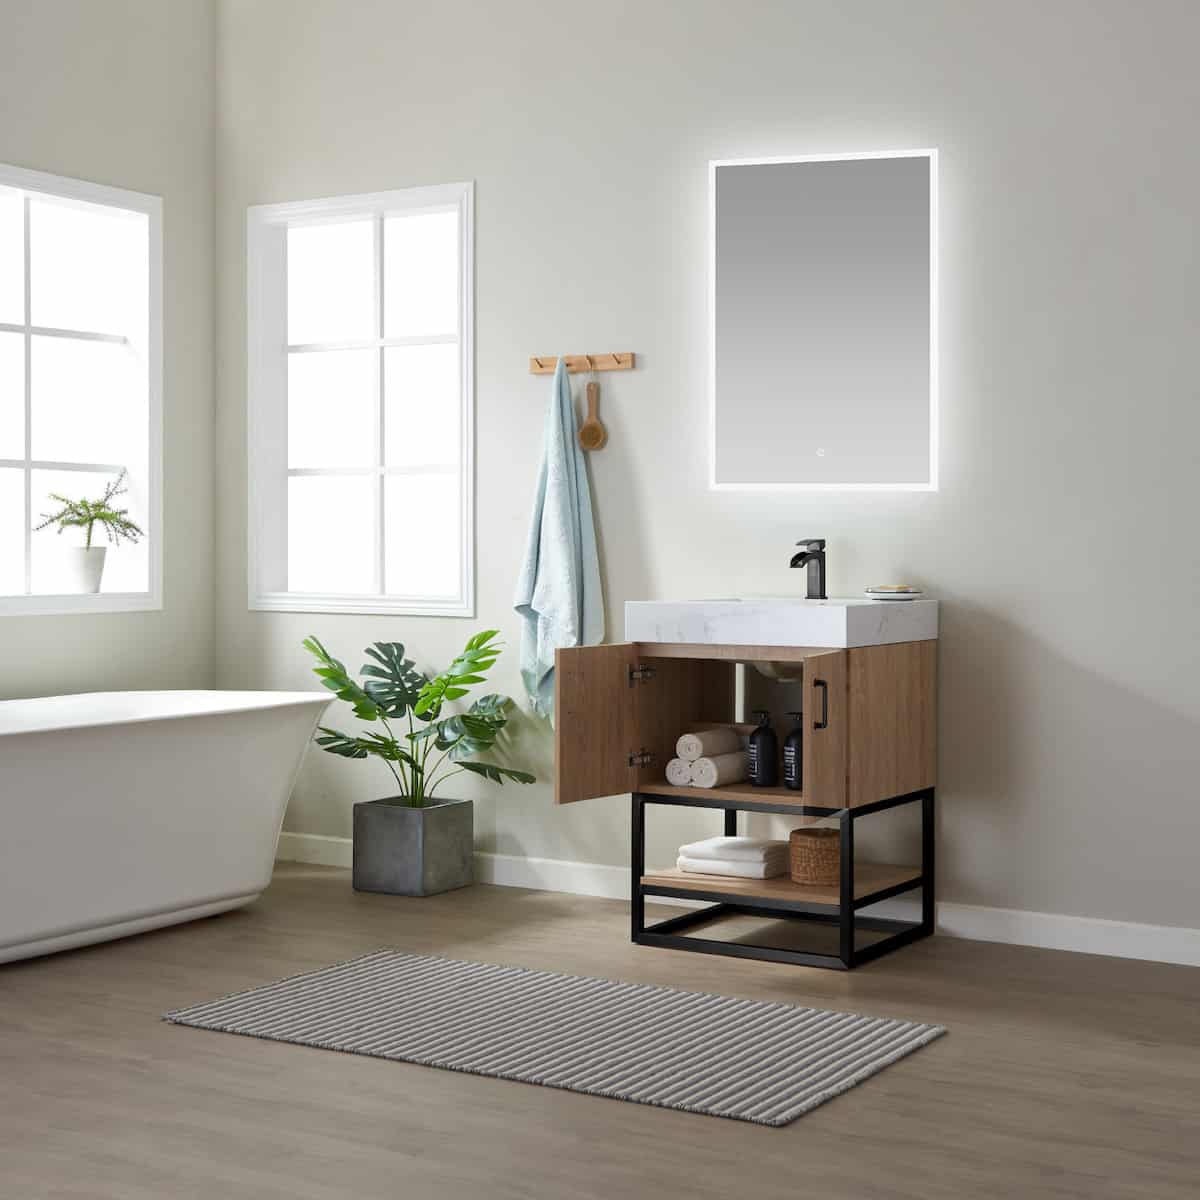 Vinnova Alistair 24 Inch Freestanding Single Vanity in North American Oak and Matte Black Frame with White Grain Stone Countertop With Mirror Inside 789024B-NO-GW